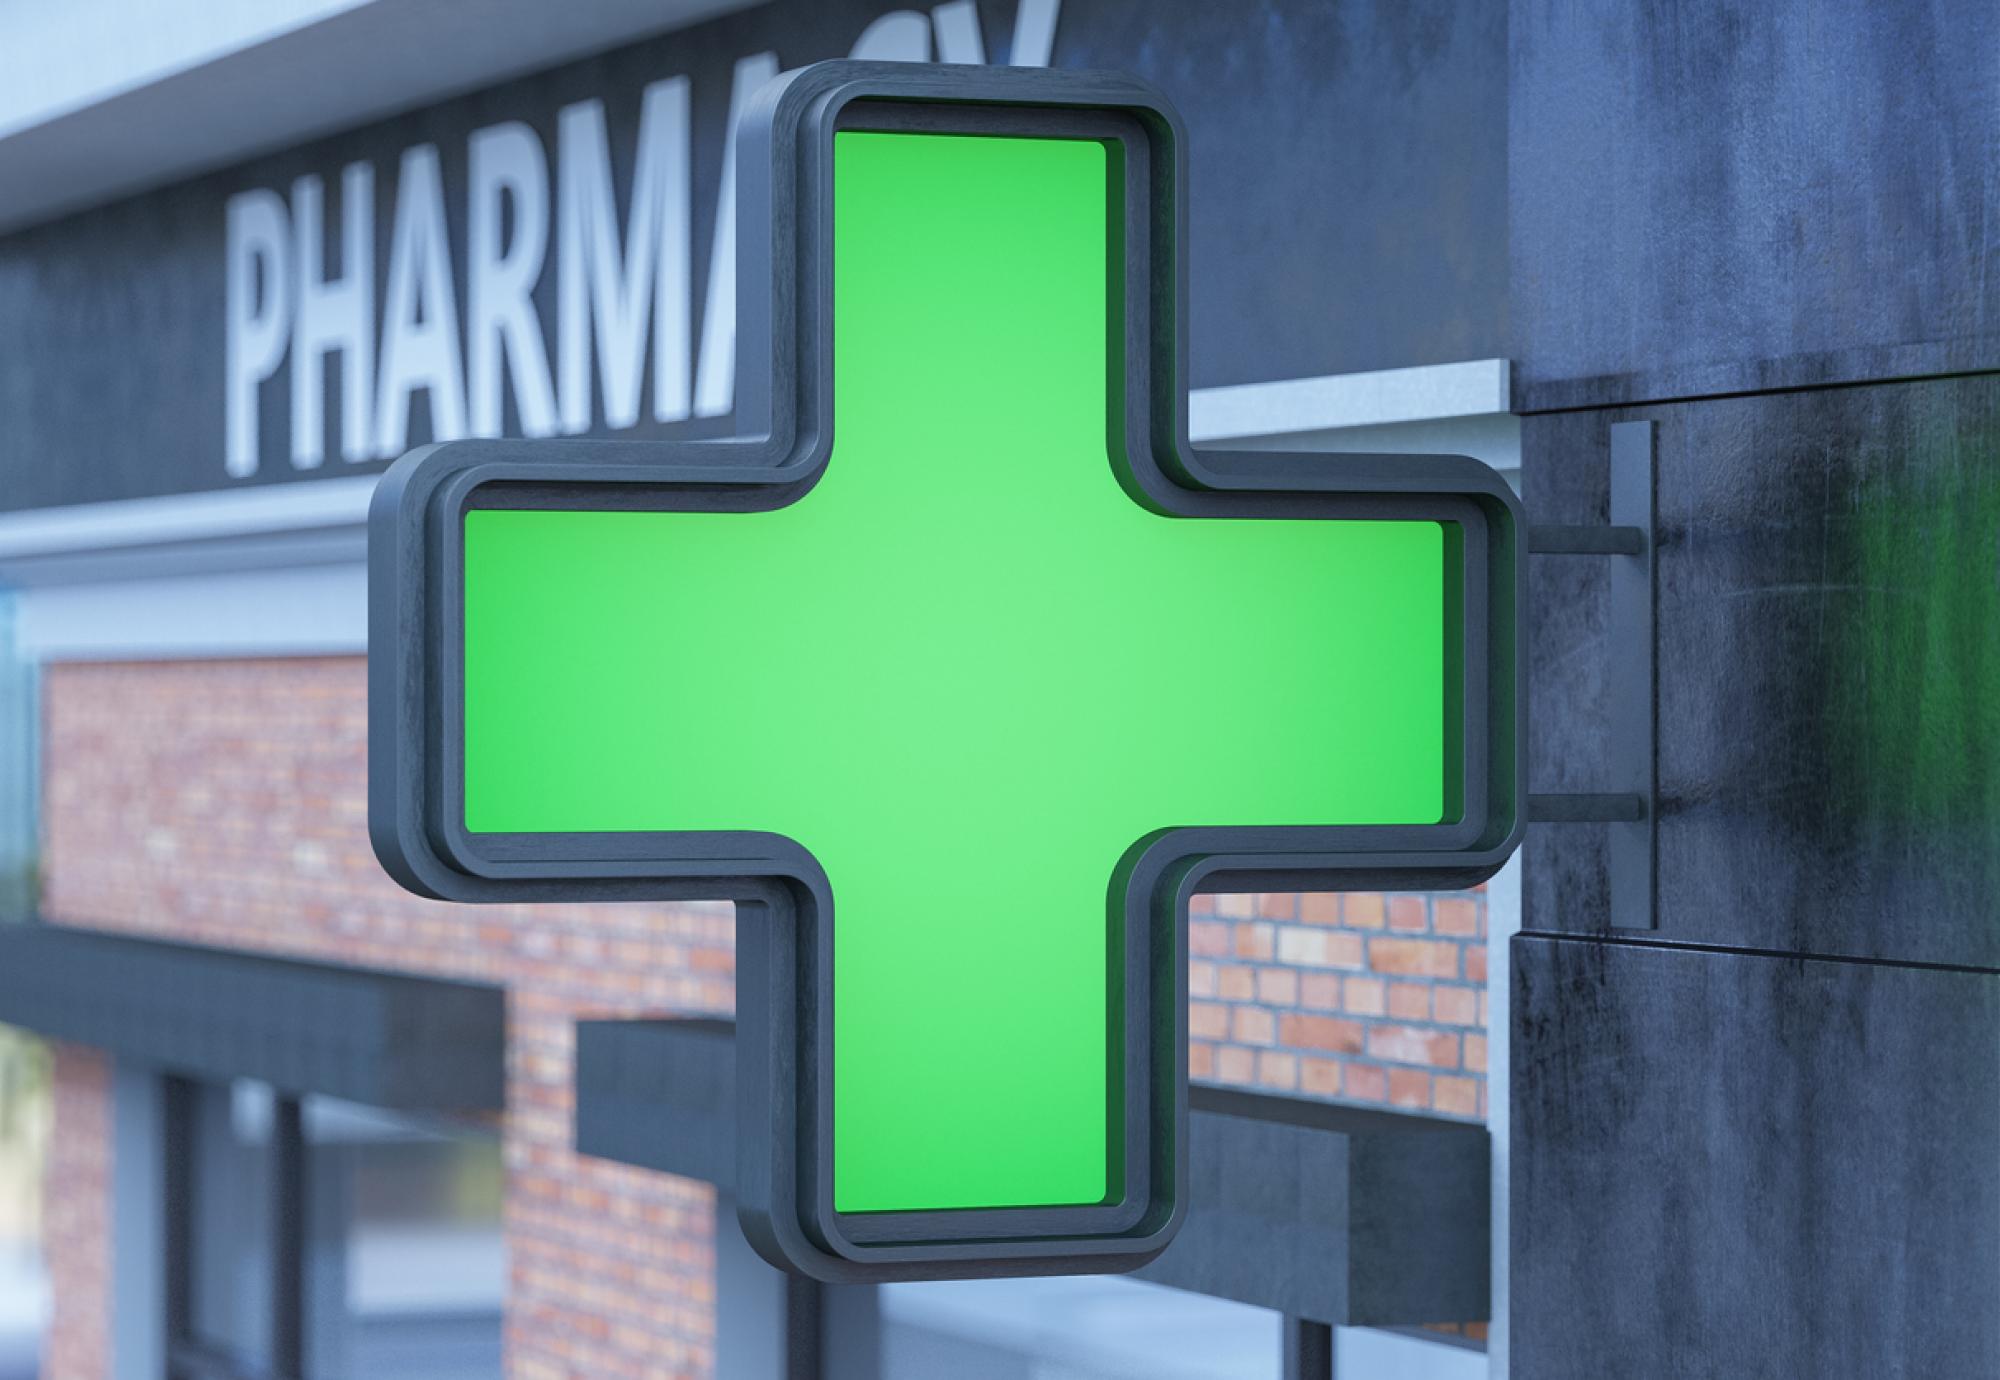 Primary care and pharmacy concept